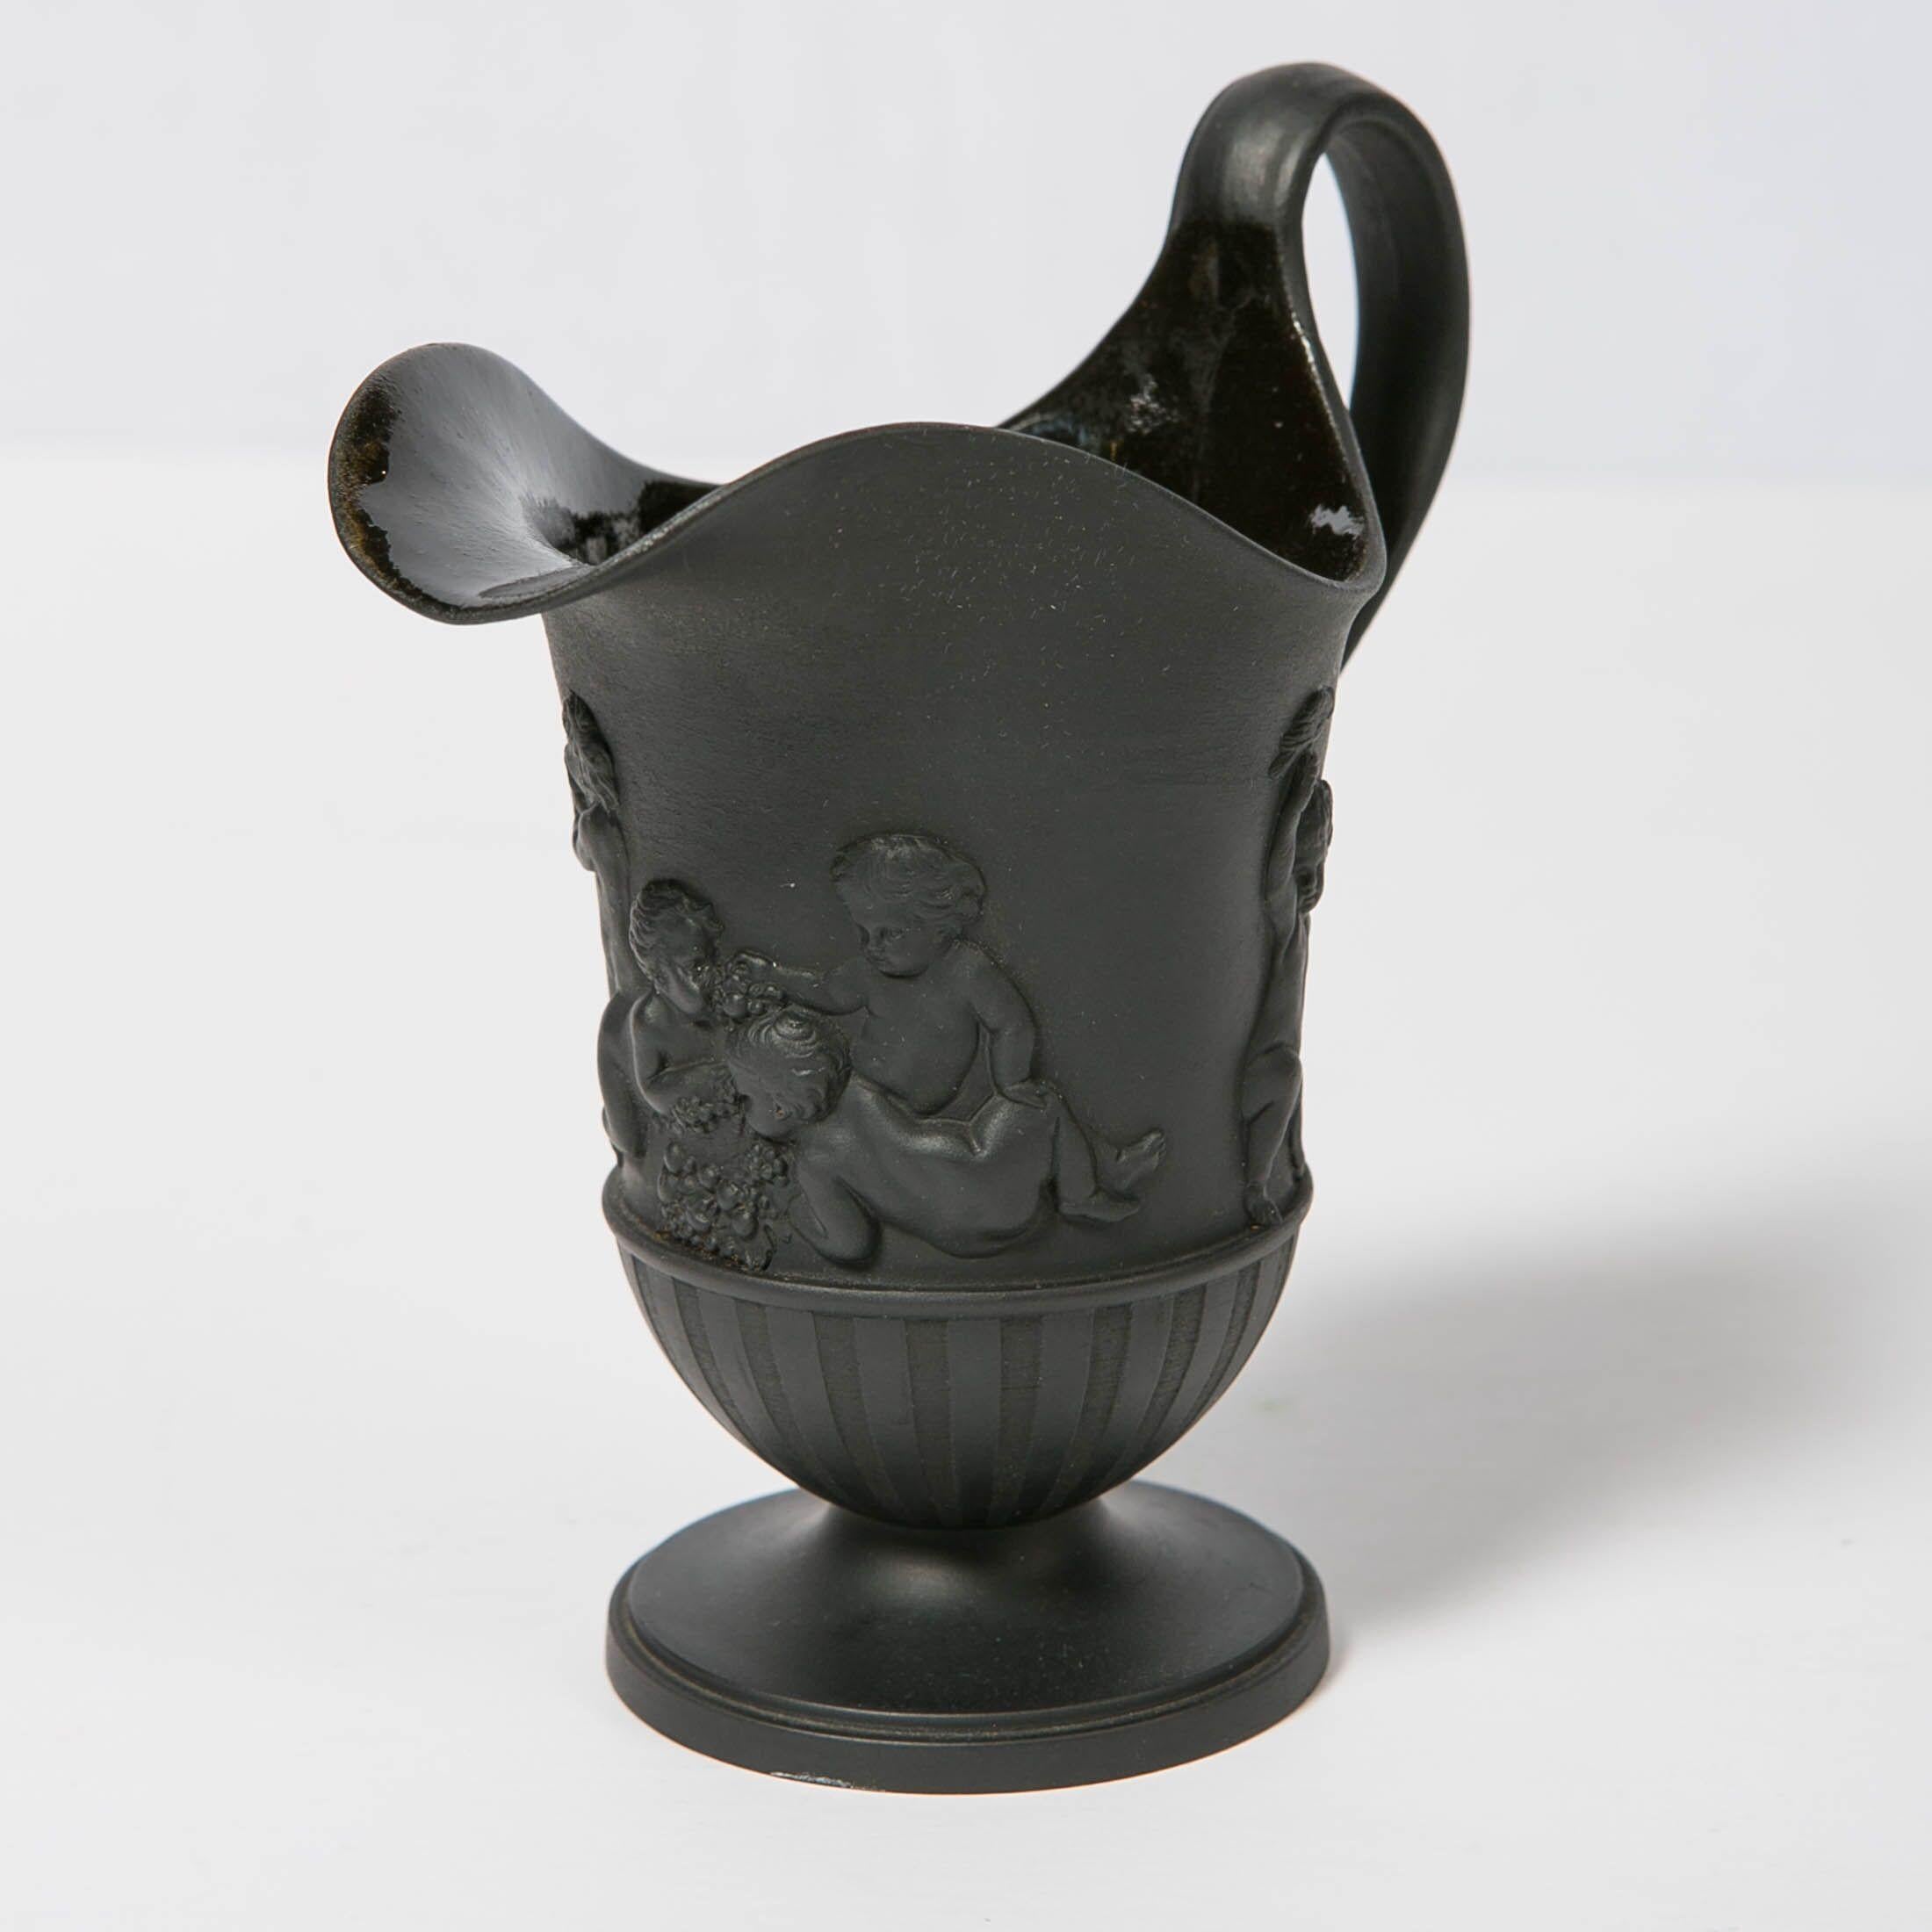 Neoclassical Wedgwood Black Basalt Small Pitcher Made, 18th Century, circa 1785